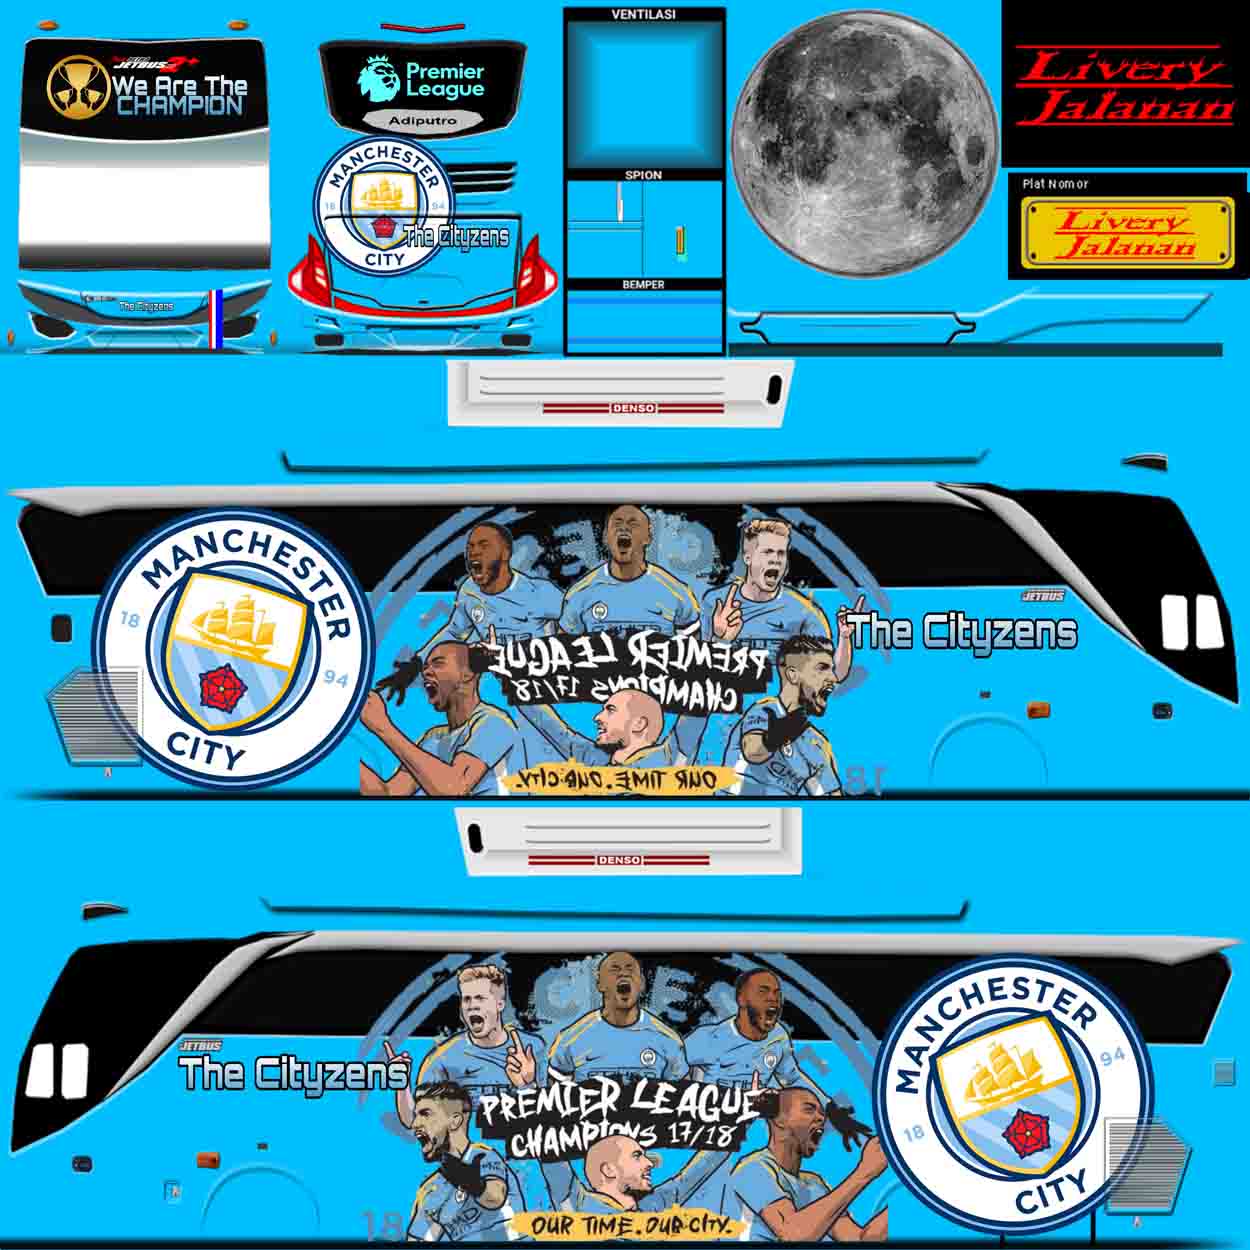 livery manchester city